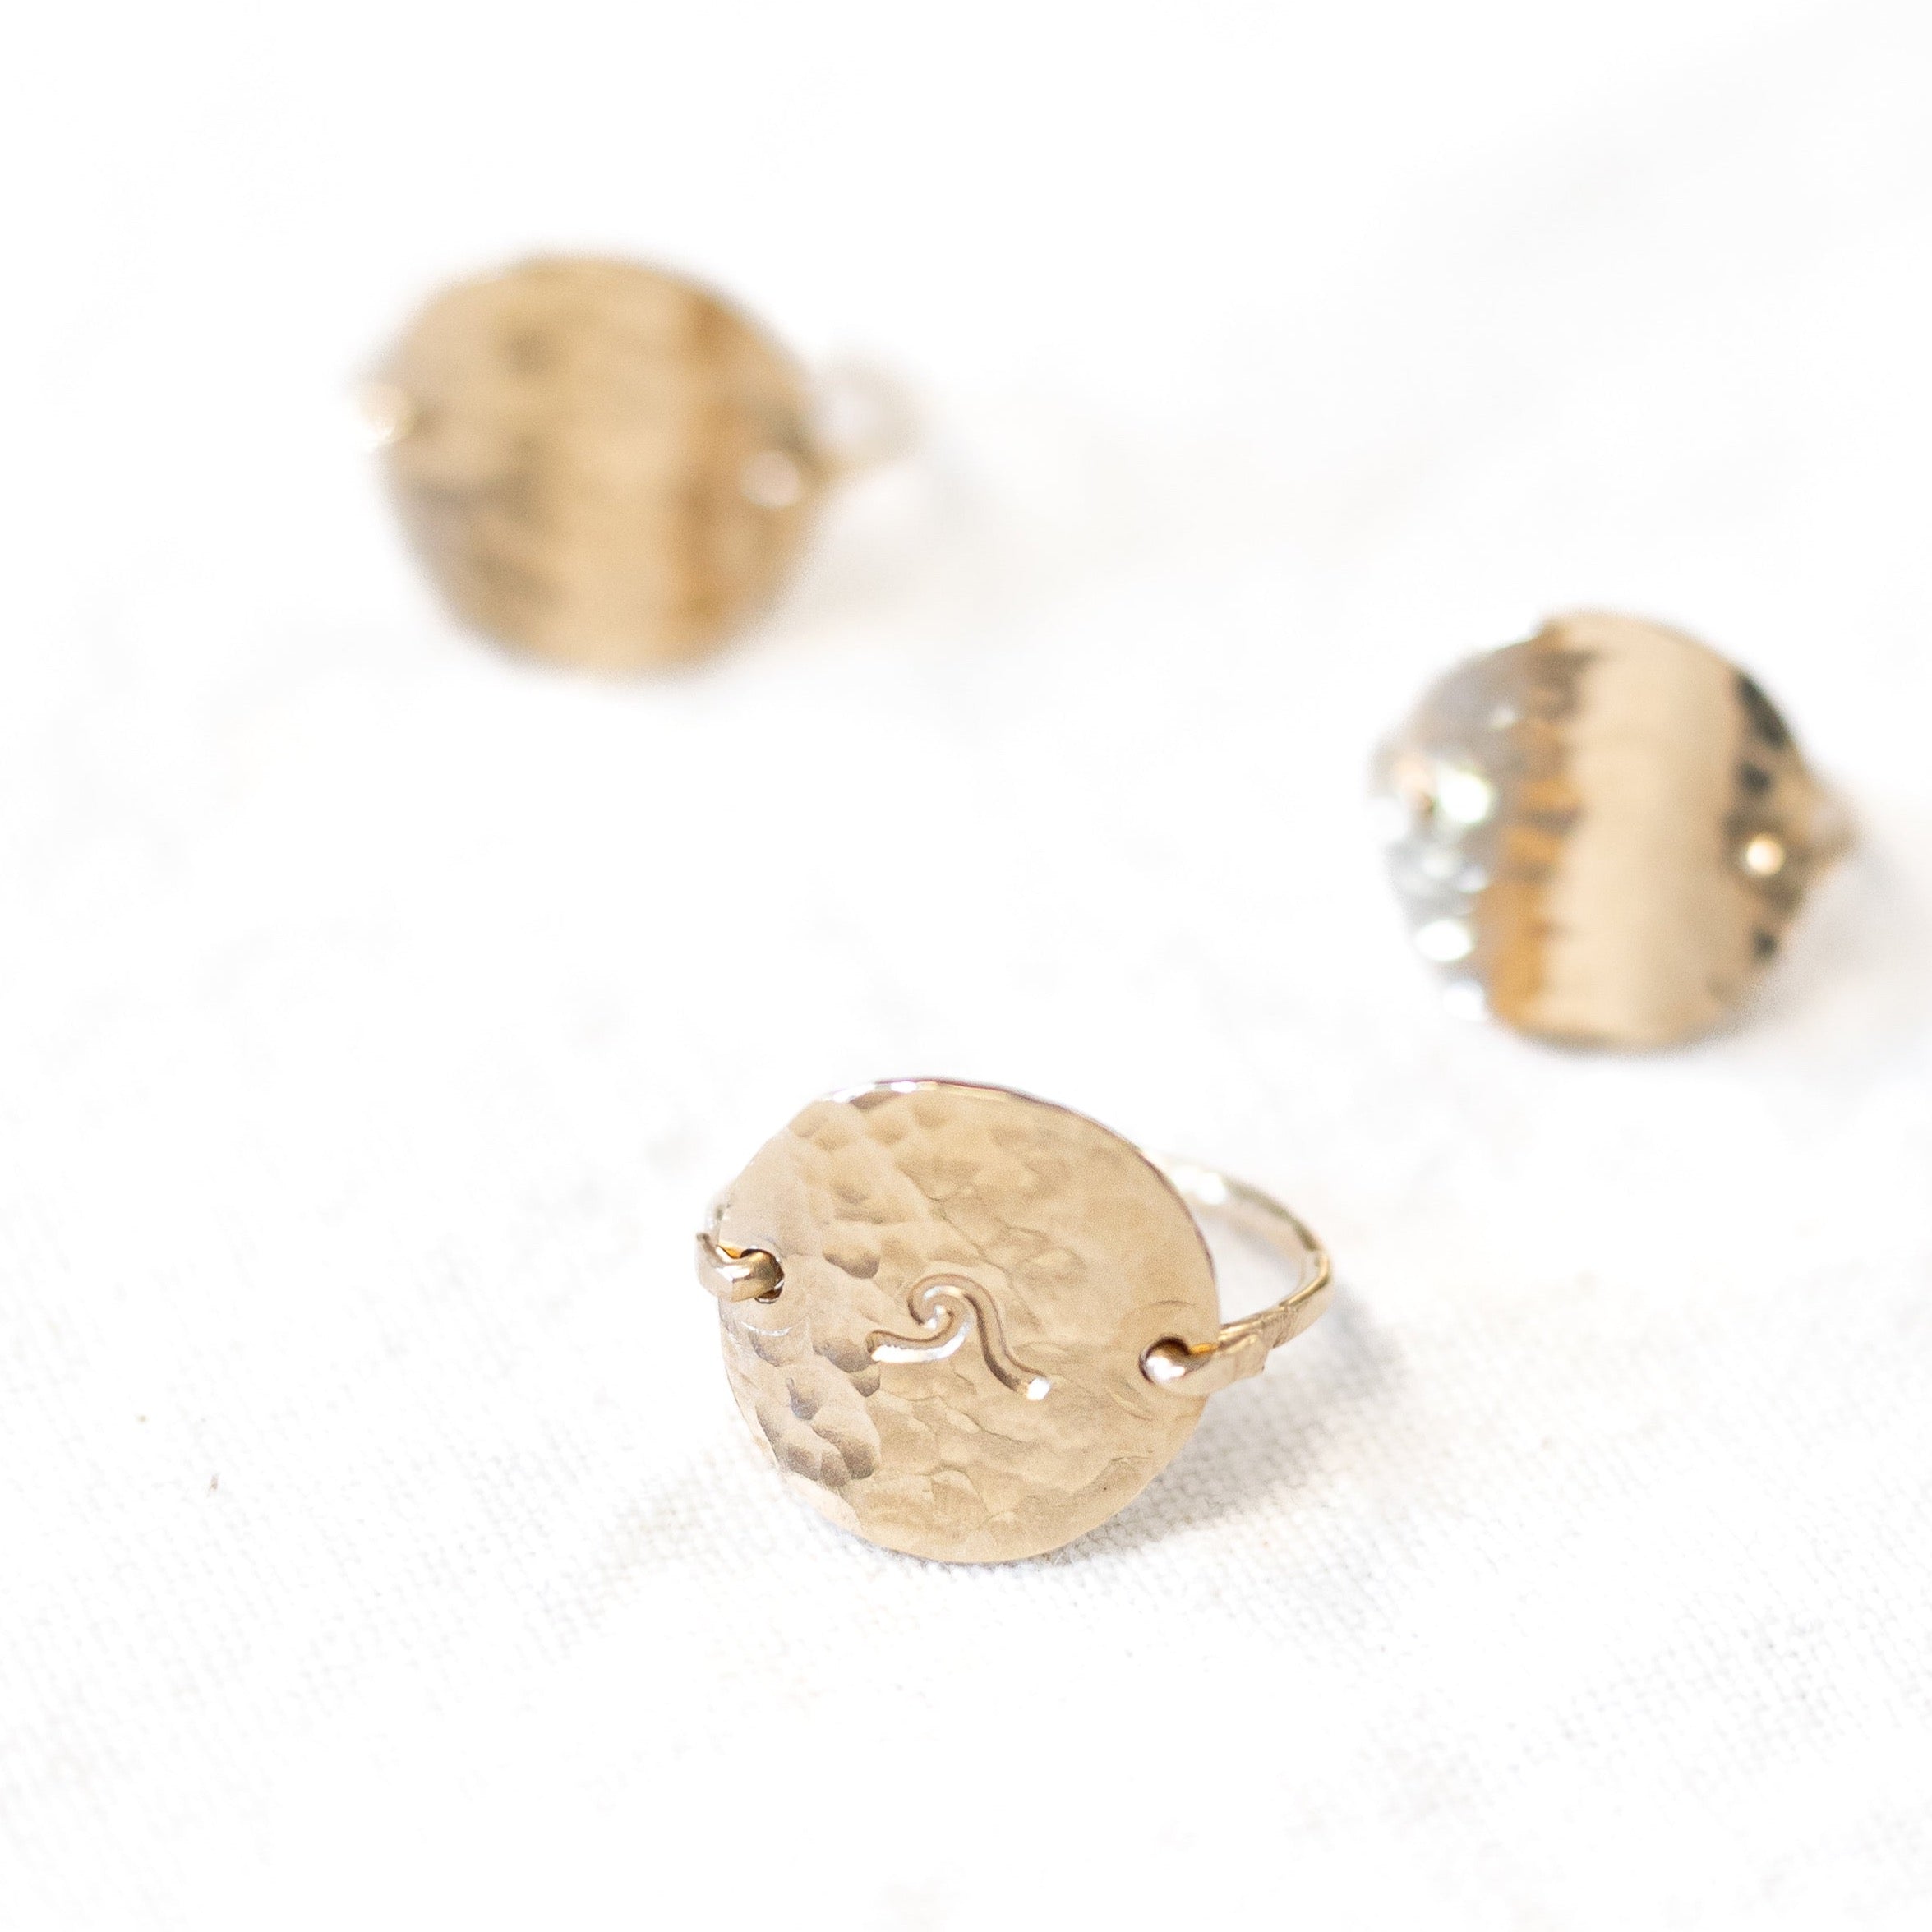 Nickel size gold filled circle hand forged into a ring with gold wire. Three shown in this image.